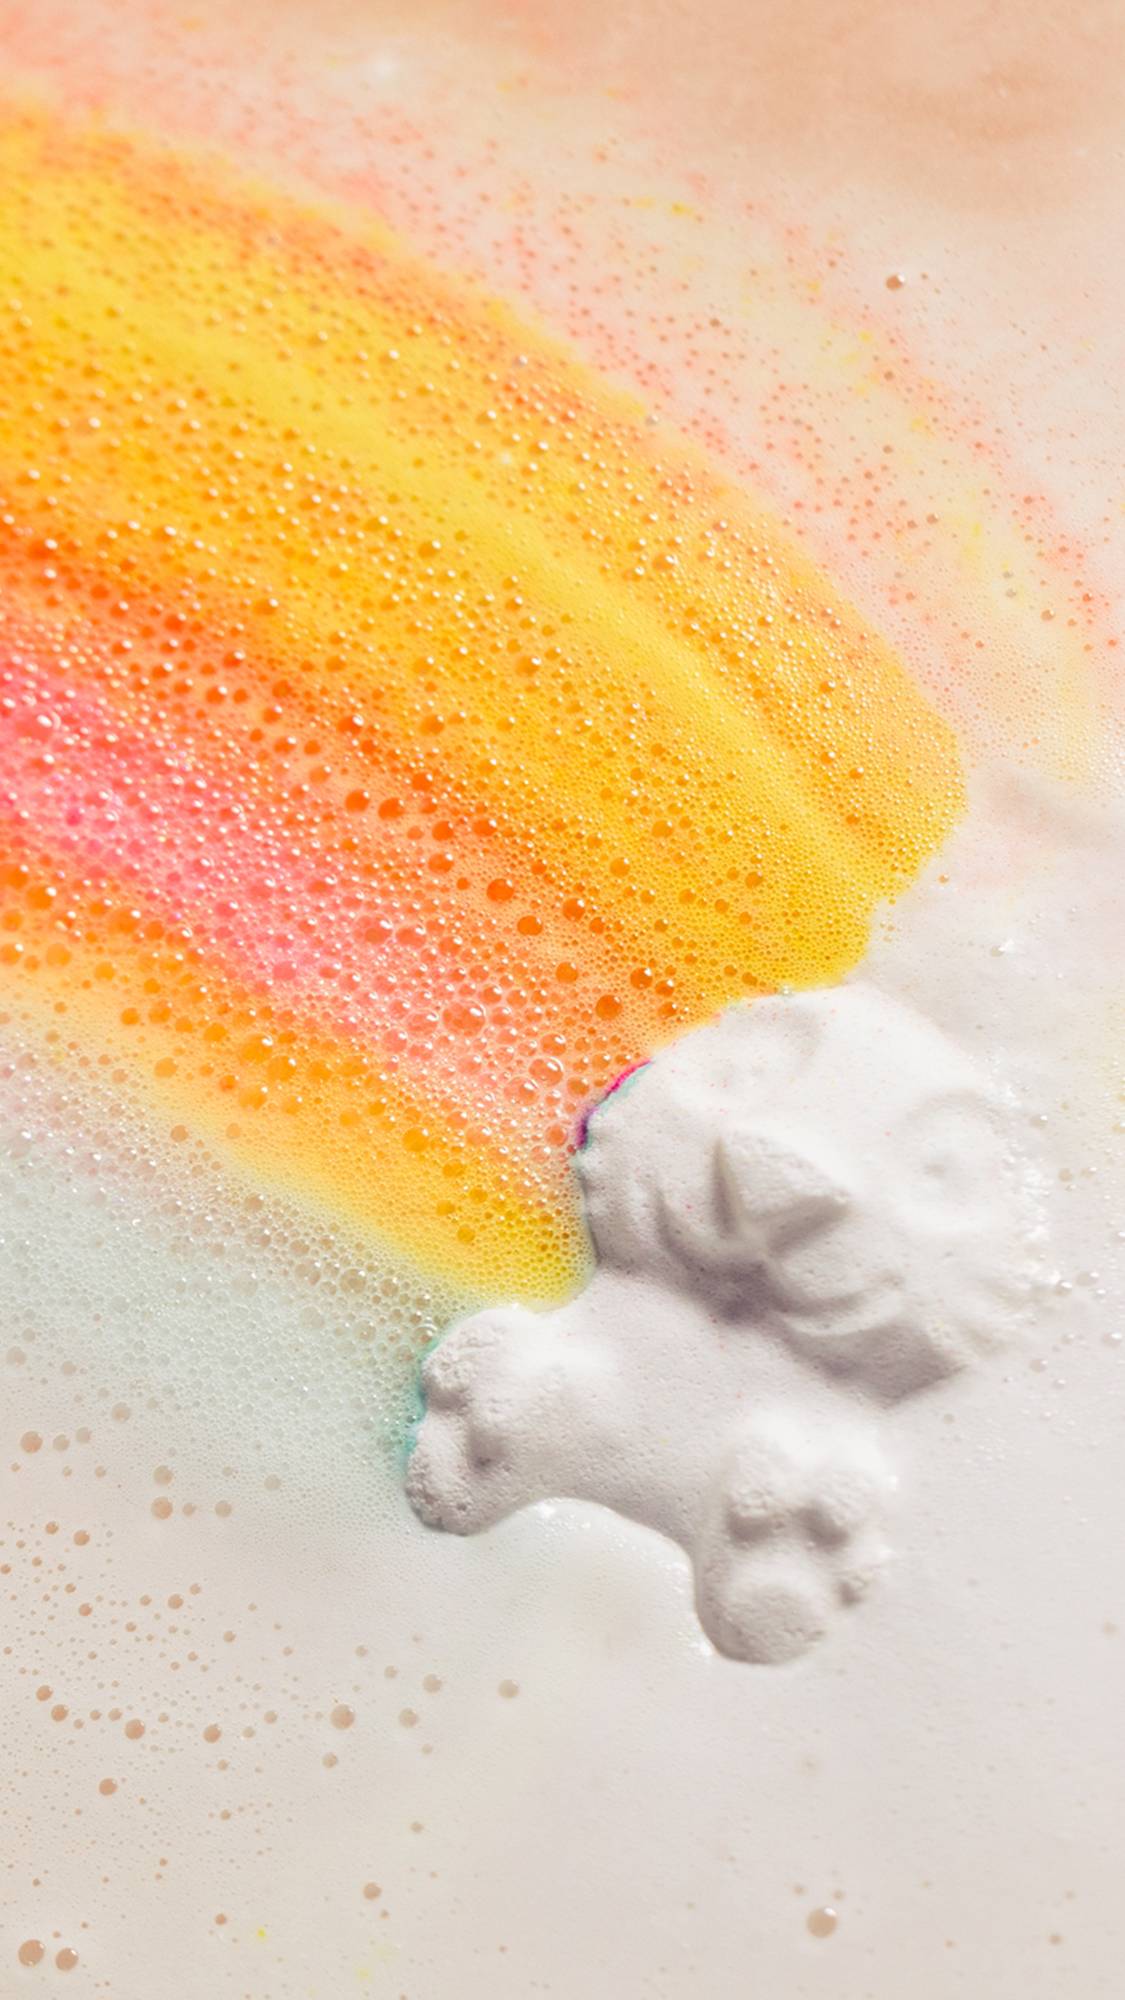 The Follow The White Rabbit bath bomb is dissolving in the bath water giving off thick white foam along with vibrant pink, orange, yellow and blue.